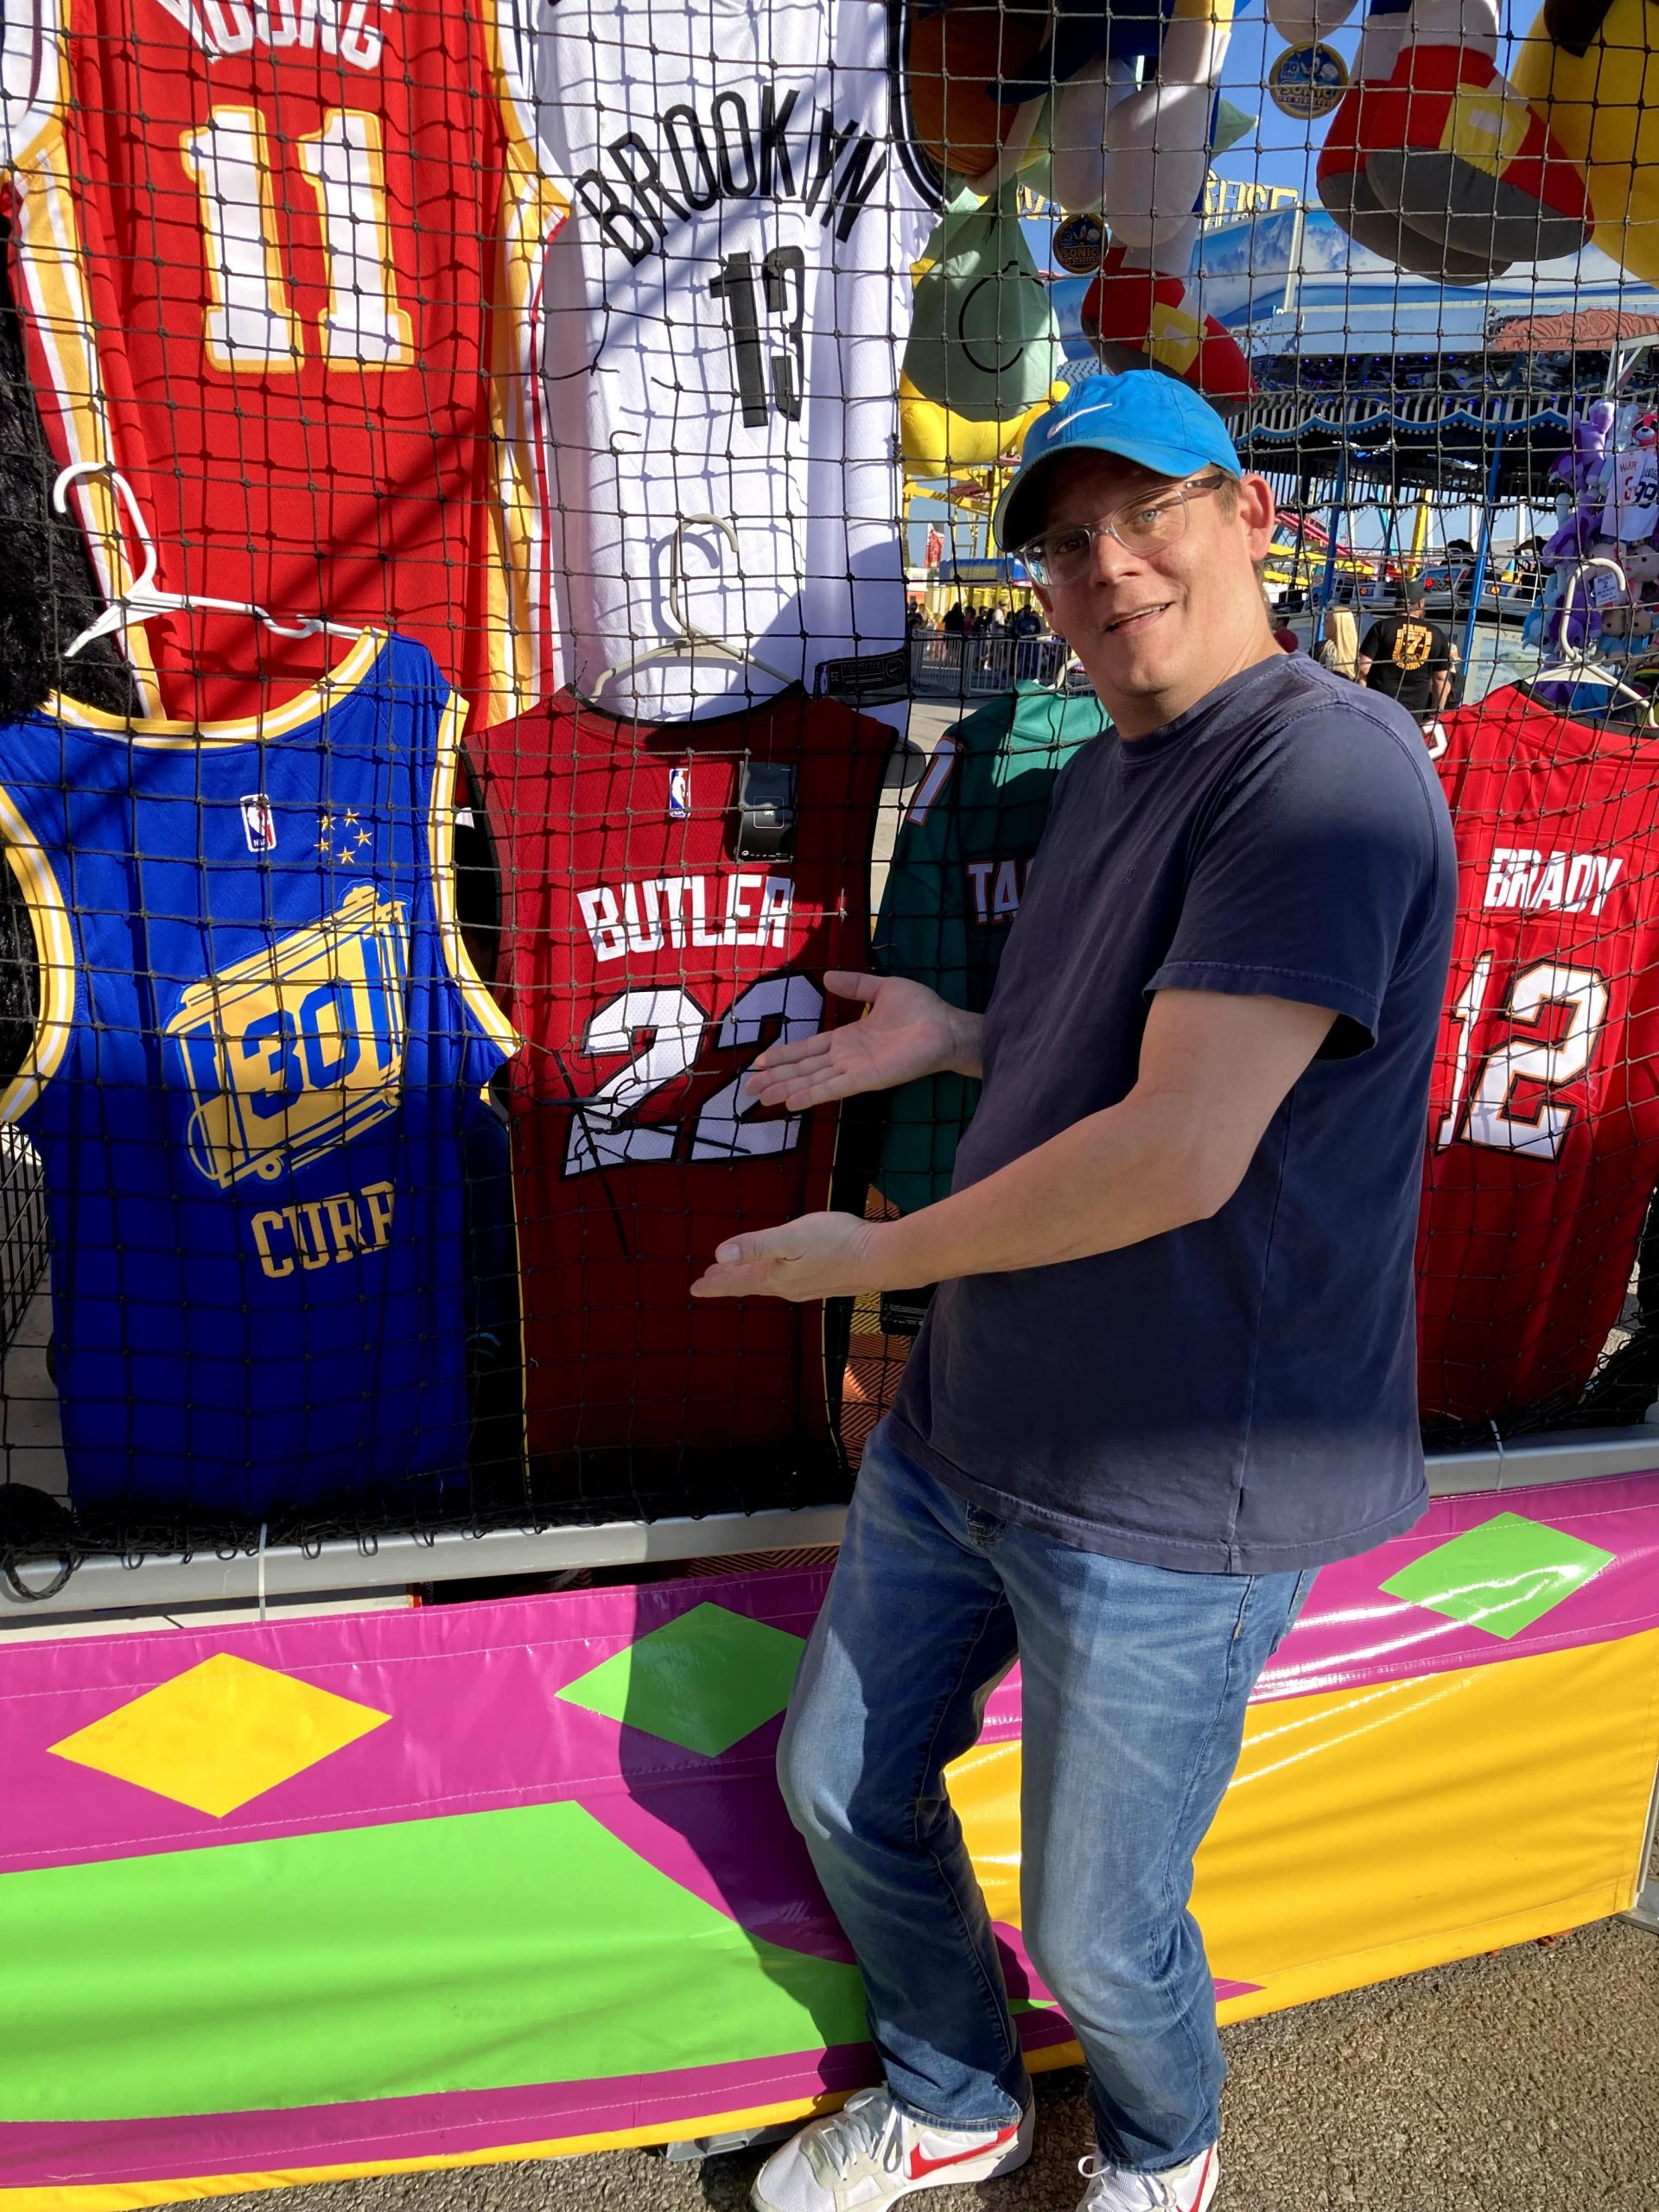 Man posing in front of sports team shirt selection.